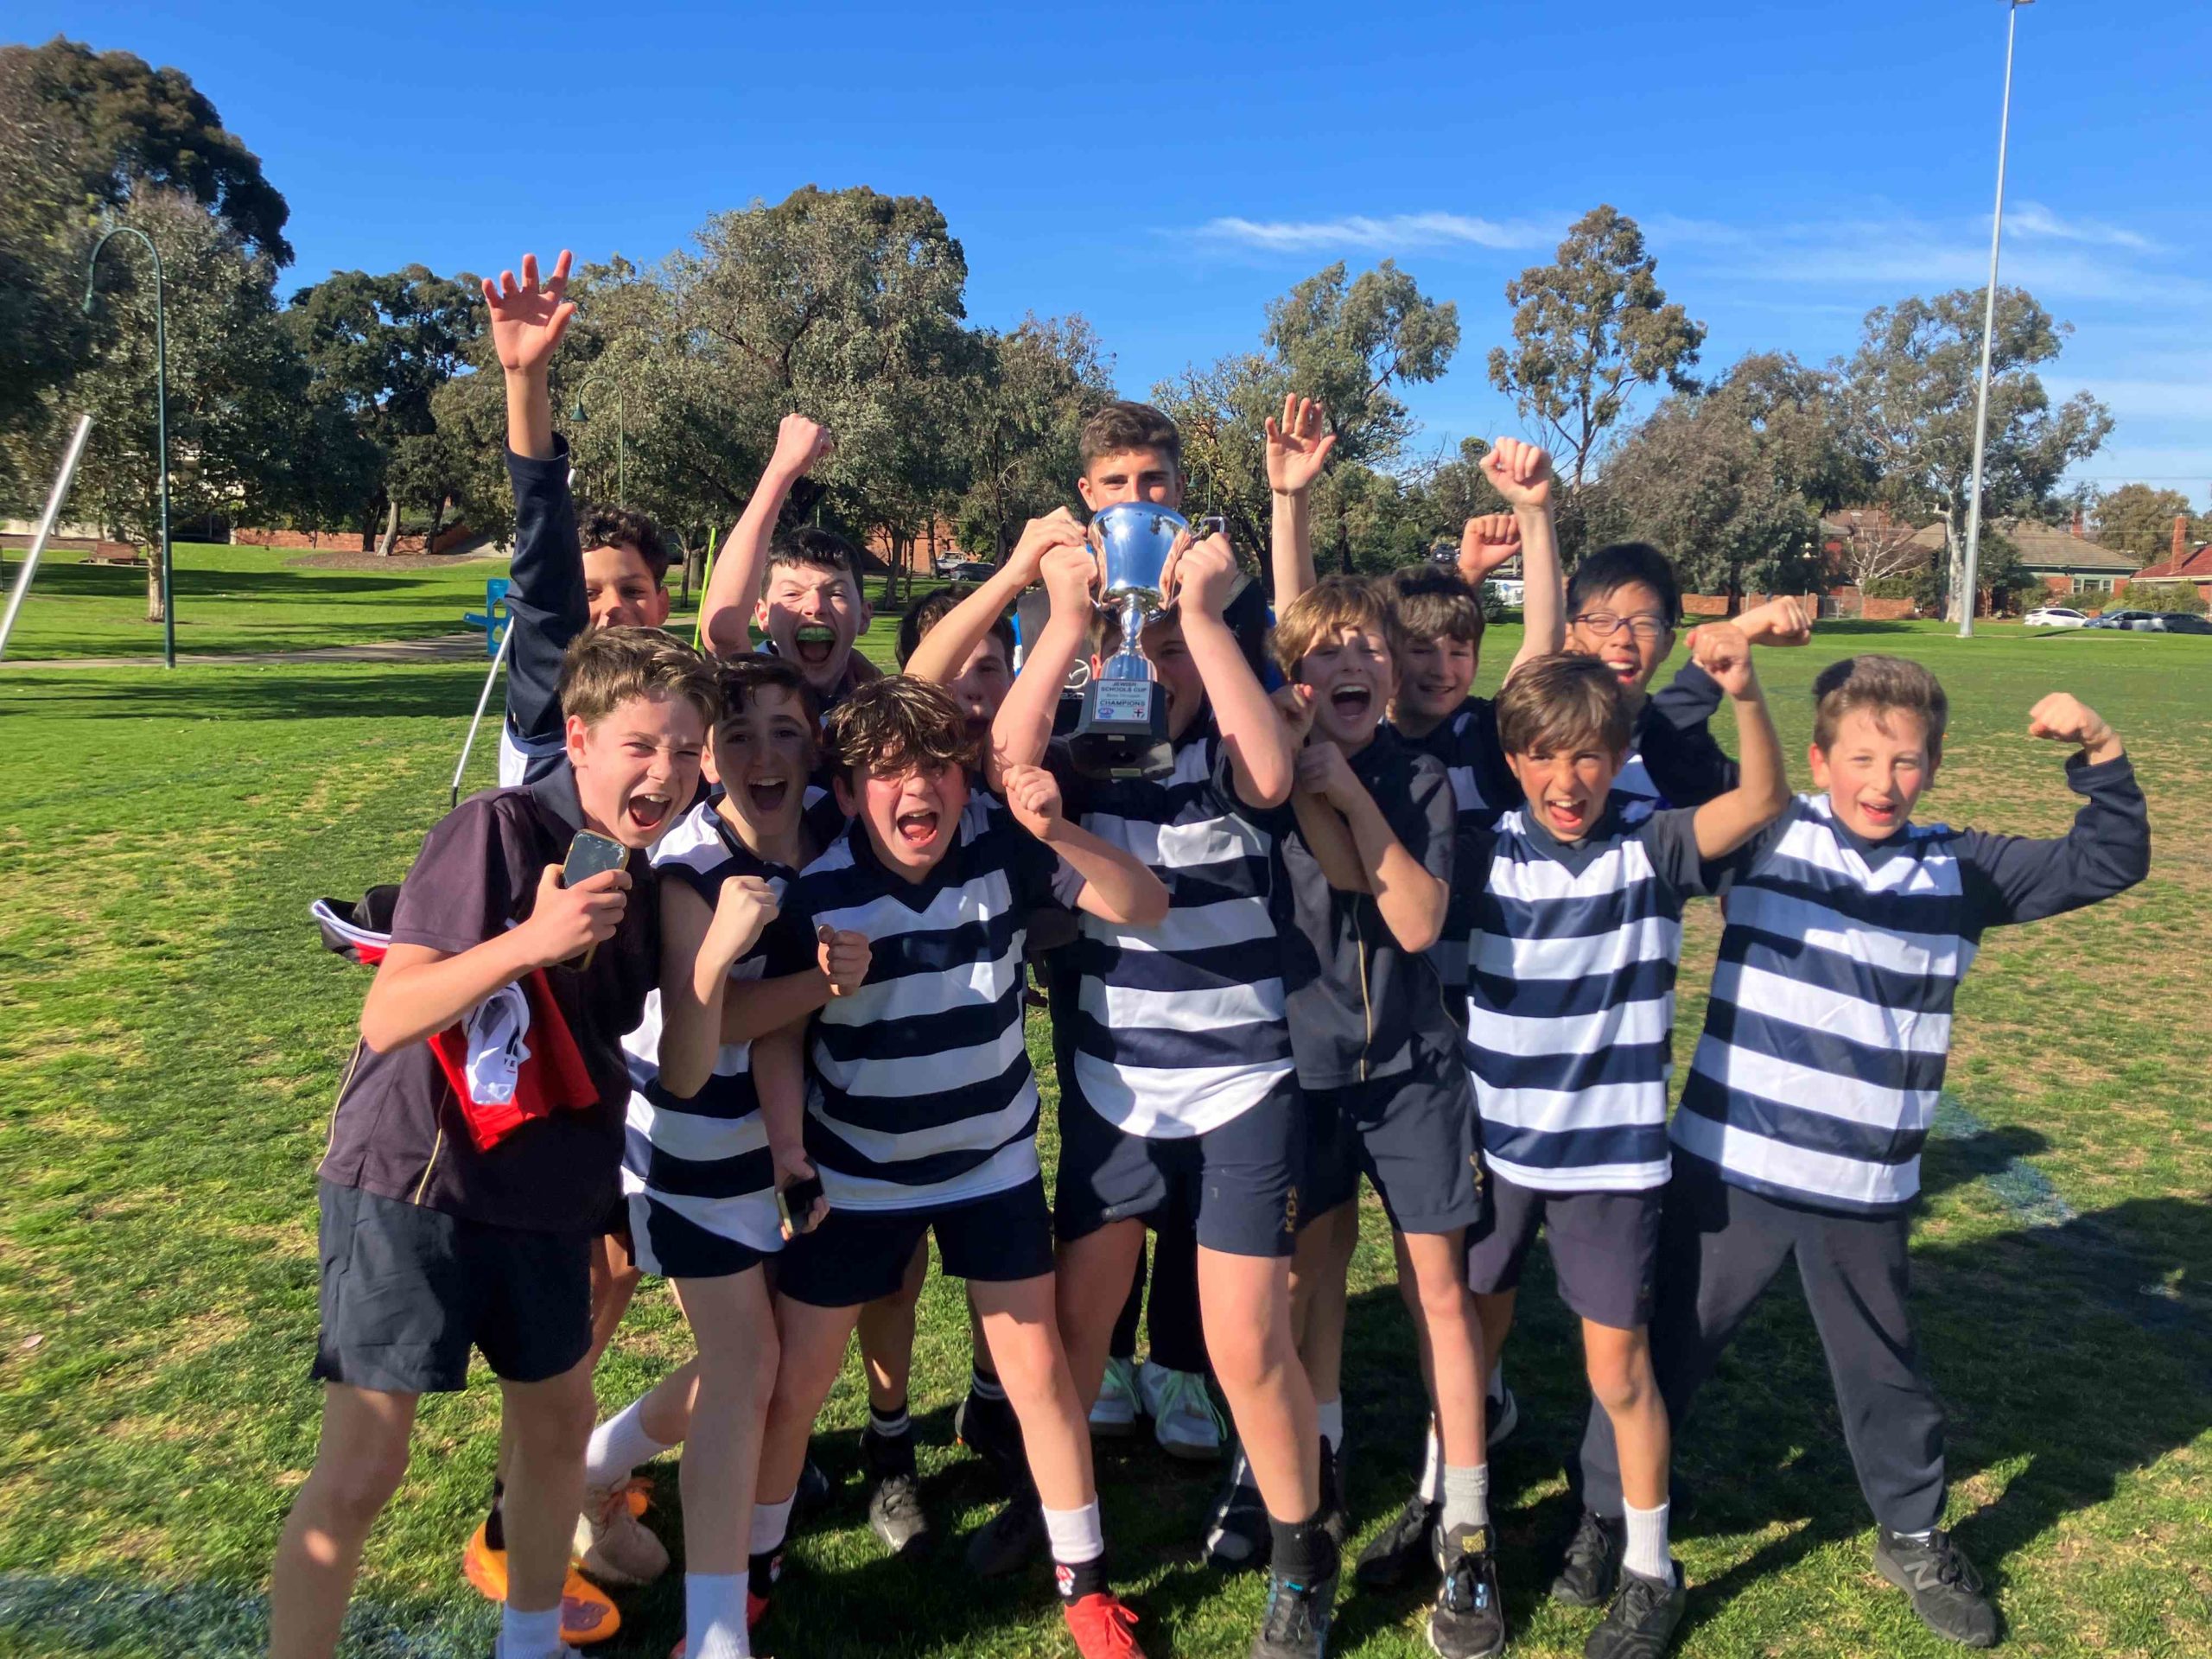 Our Year 6 boys are cheering, with their arms in the air. One boy in the middle is holding a trophy. they have just won the Jewish Schools' 9s AFL Cup.